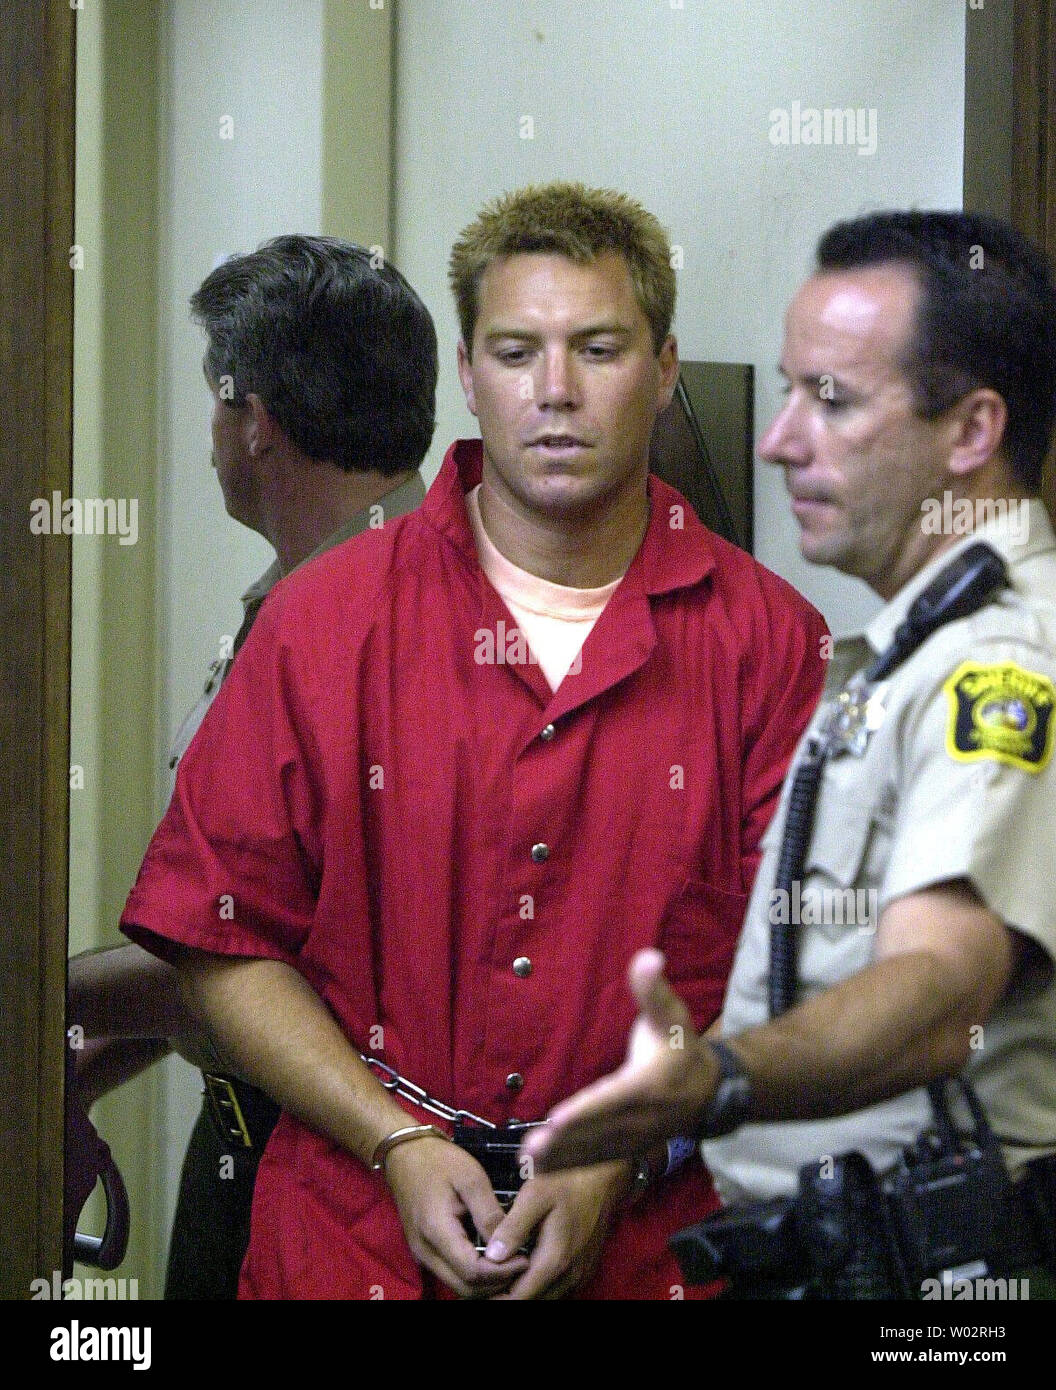 Scott Peterson is led into the Stanislaus County Superior Court on April 21, 2003 for his arraignment for the murder of his wife Laci and their unborn son.   (UPI Photo/The Modesto Bee) Stock Photo